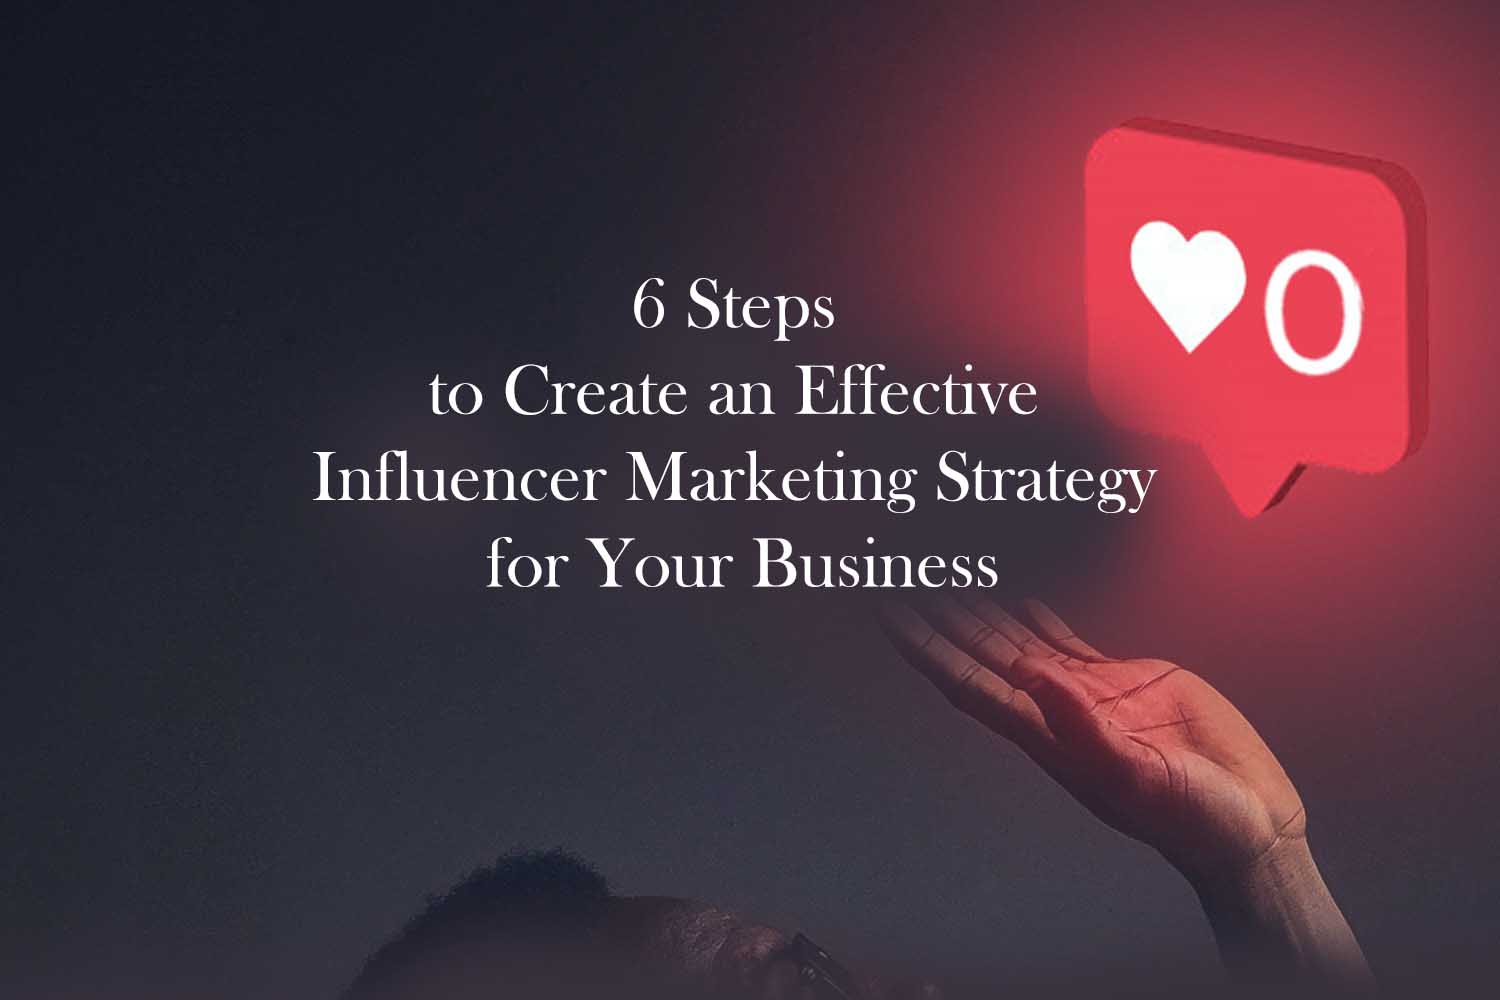 6 Steps to Create an Effective Influencer Marketing Strategy for Your Business